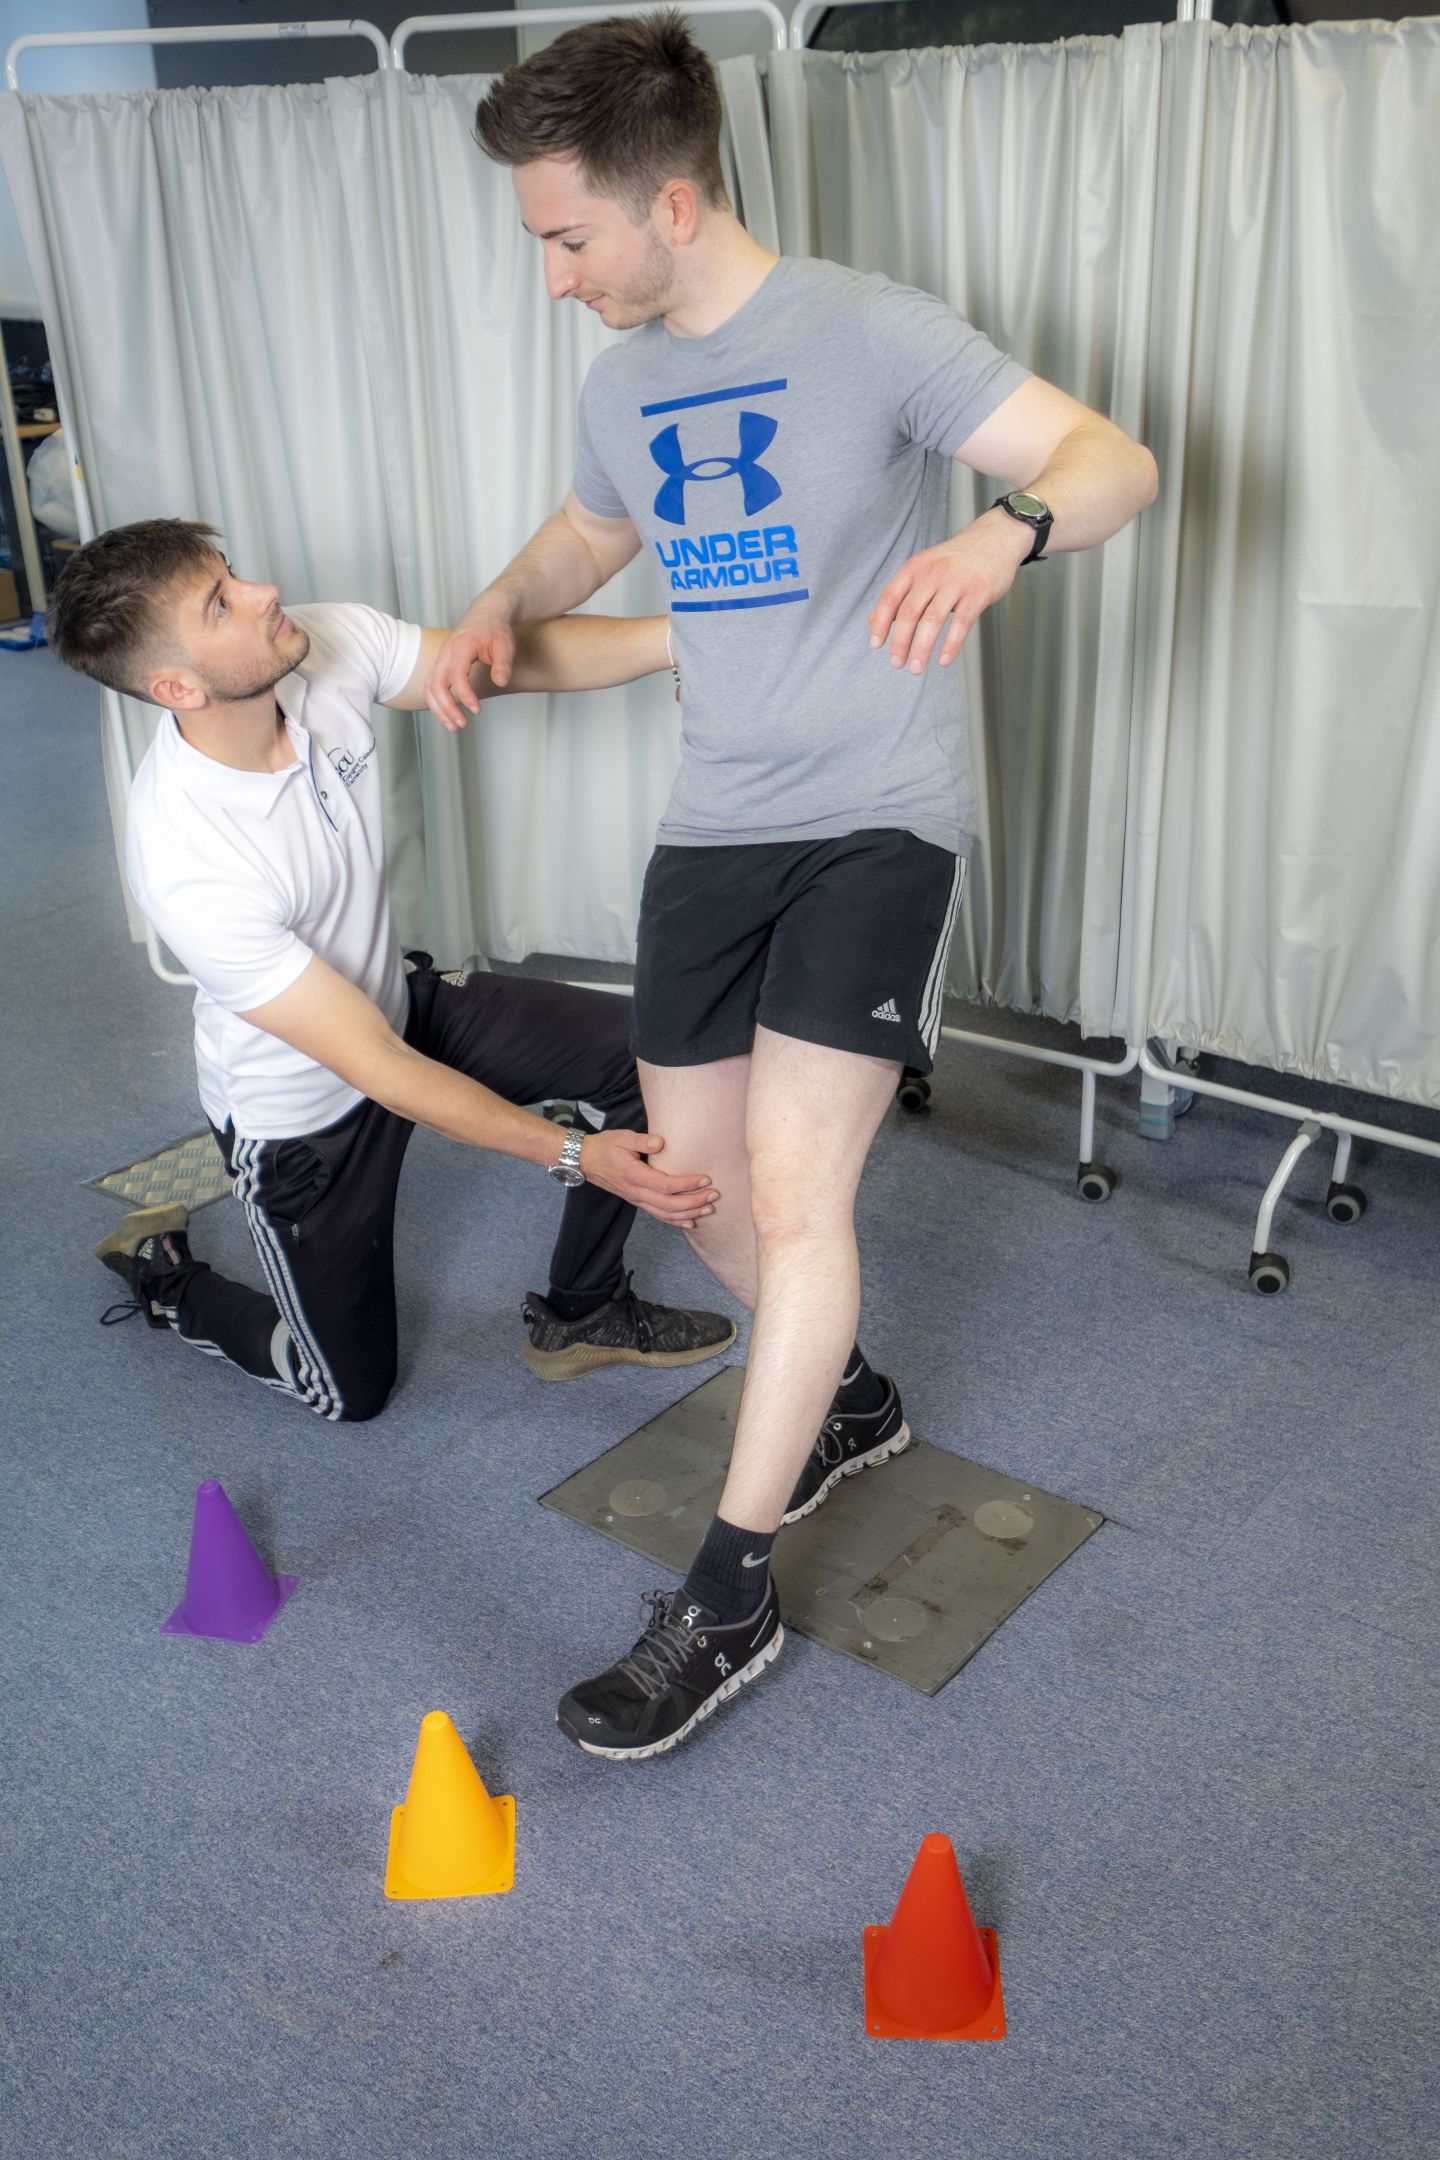 MSc Physiotherapy students, Christopher Walker and Christopher Gibson, taking part in physiotherapy-related activities in the Glasgow campus. 

L-R: Christopher Walker and Christopher Gibson